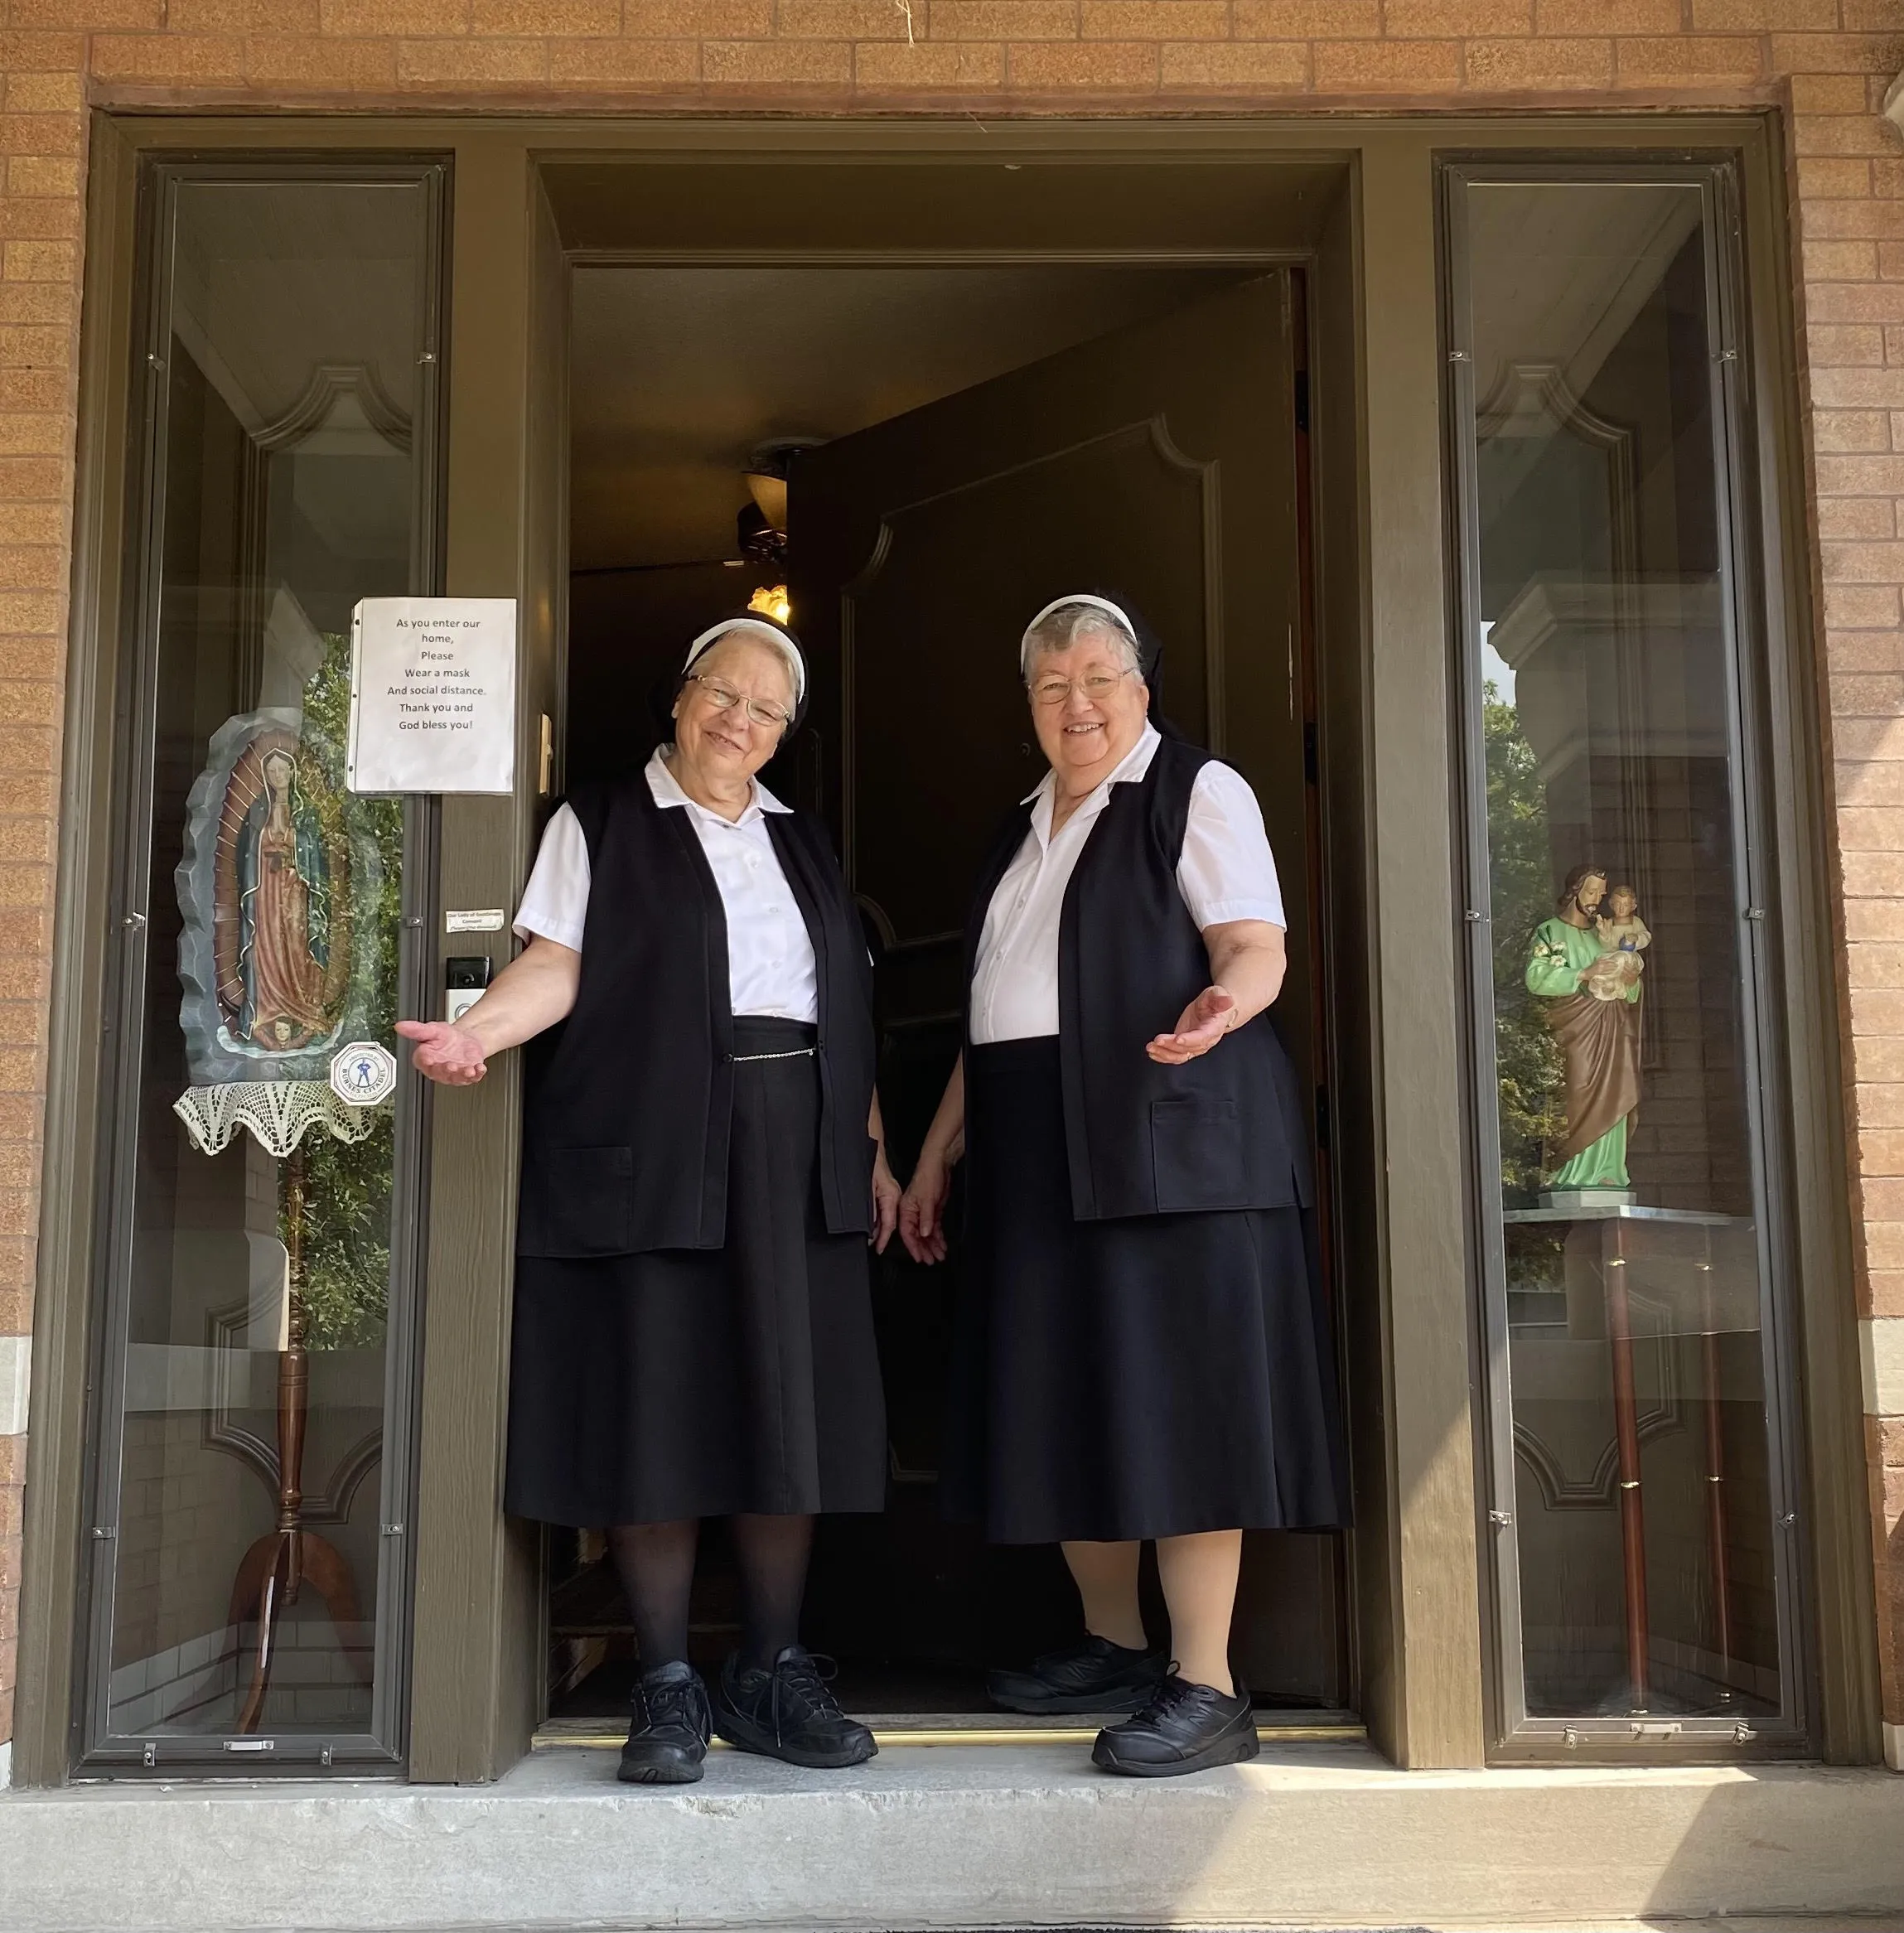 Sister Sue Ann Hall (left) and Sister Delores Vogt of the Franciscan Sisters of Christian Charity welcome visitors to Our Lady of Guadalupe convent in St. Louis.?w=200&h=150